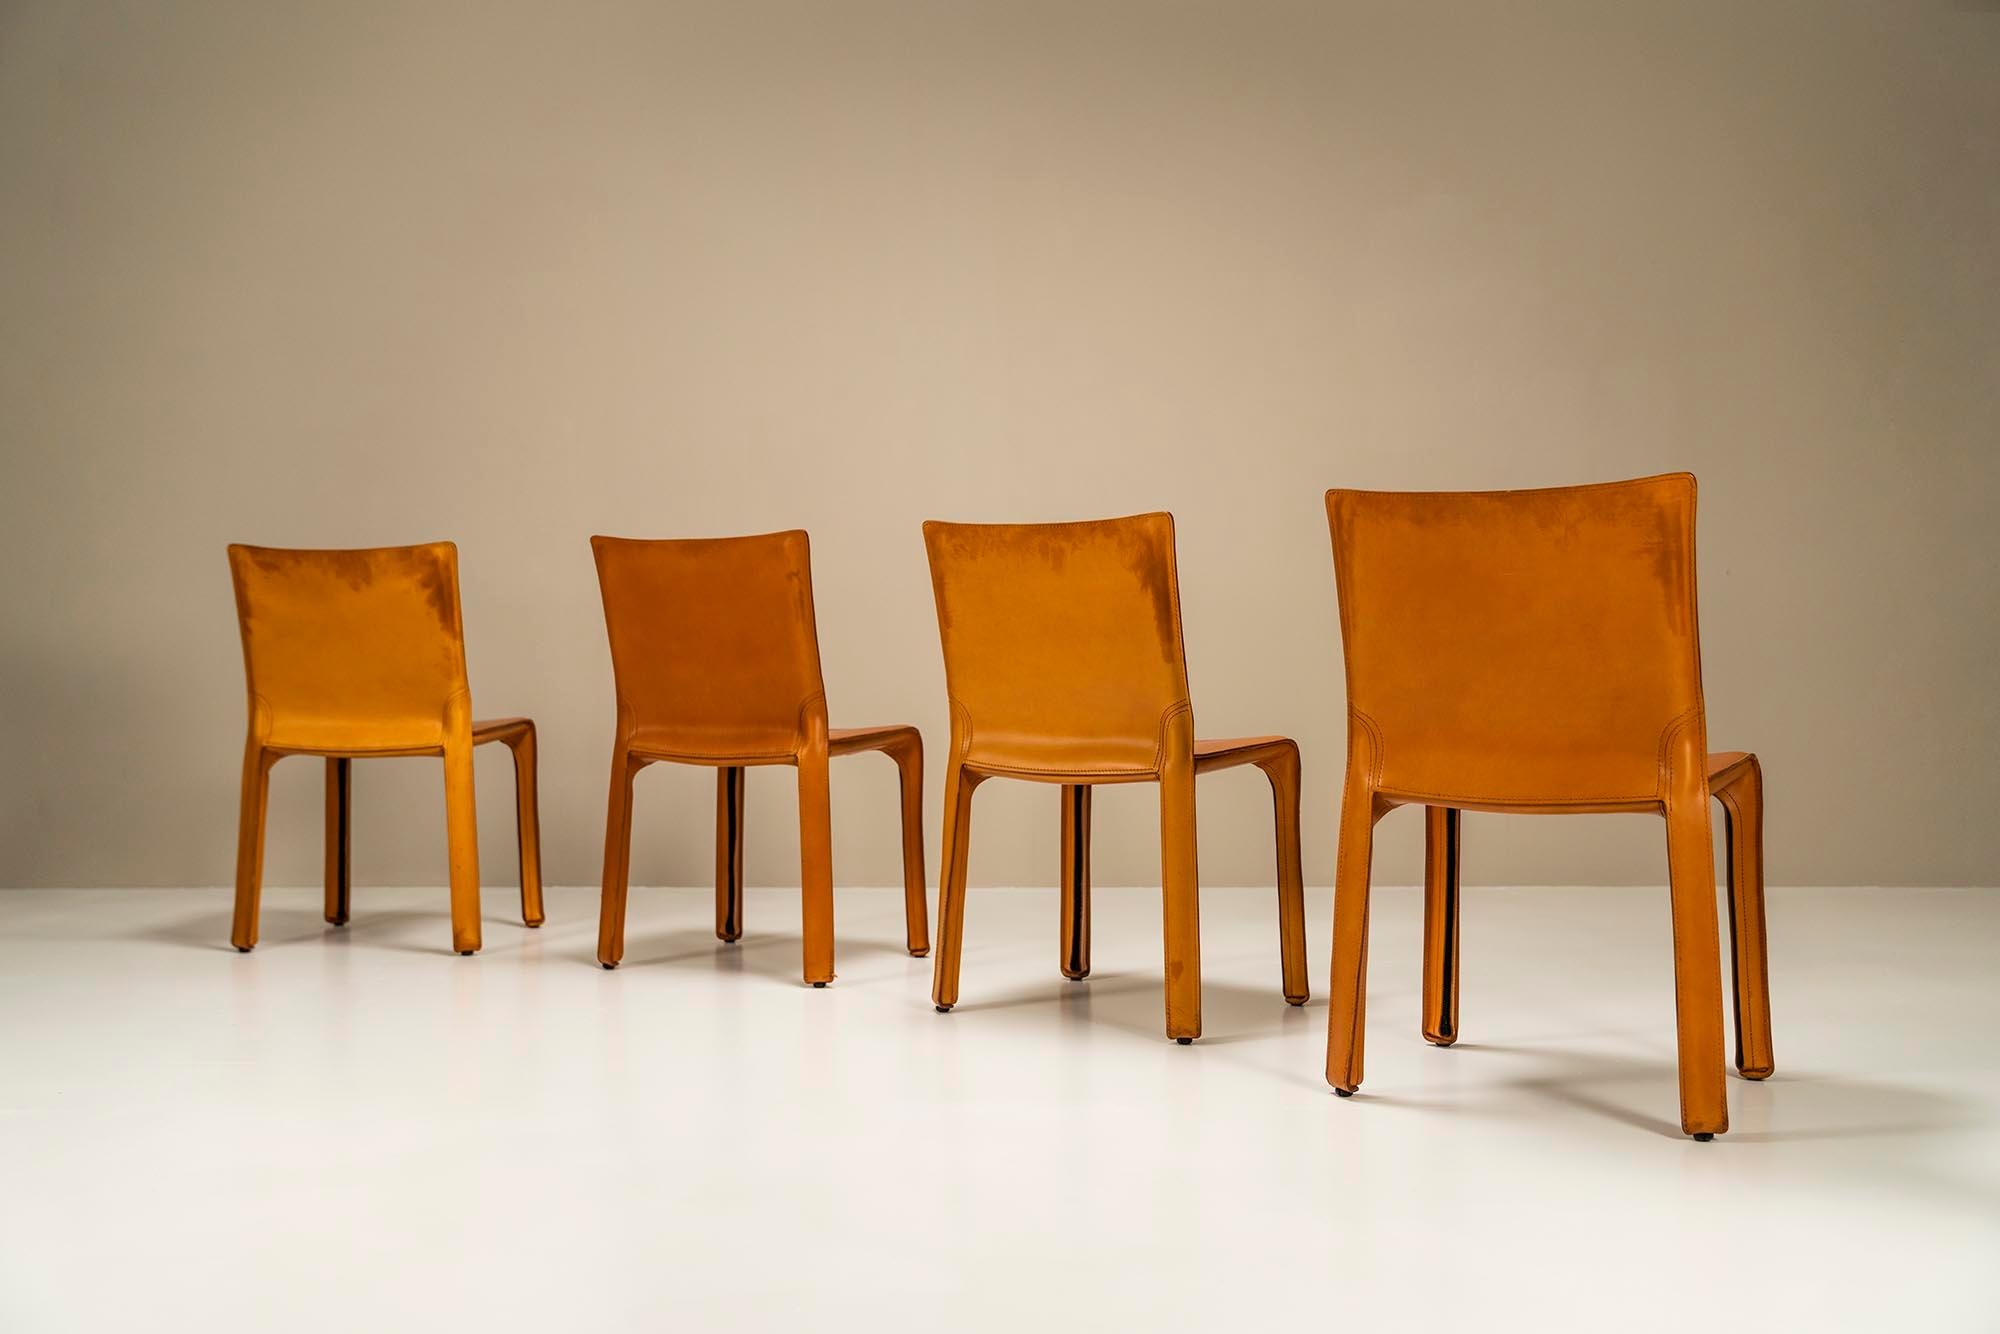 Italian Set of 4 'CAB' Chairs in Cognac Leather by Mario Bellini for Cassina, Italy 1977